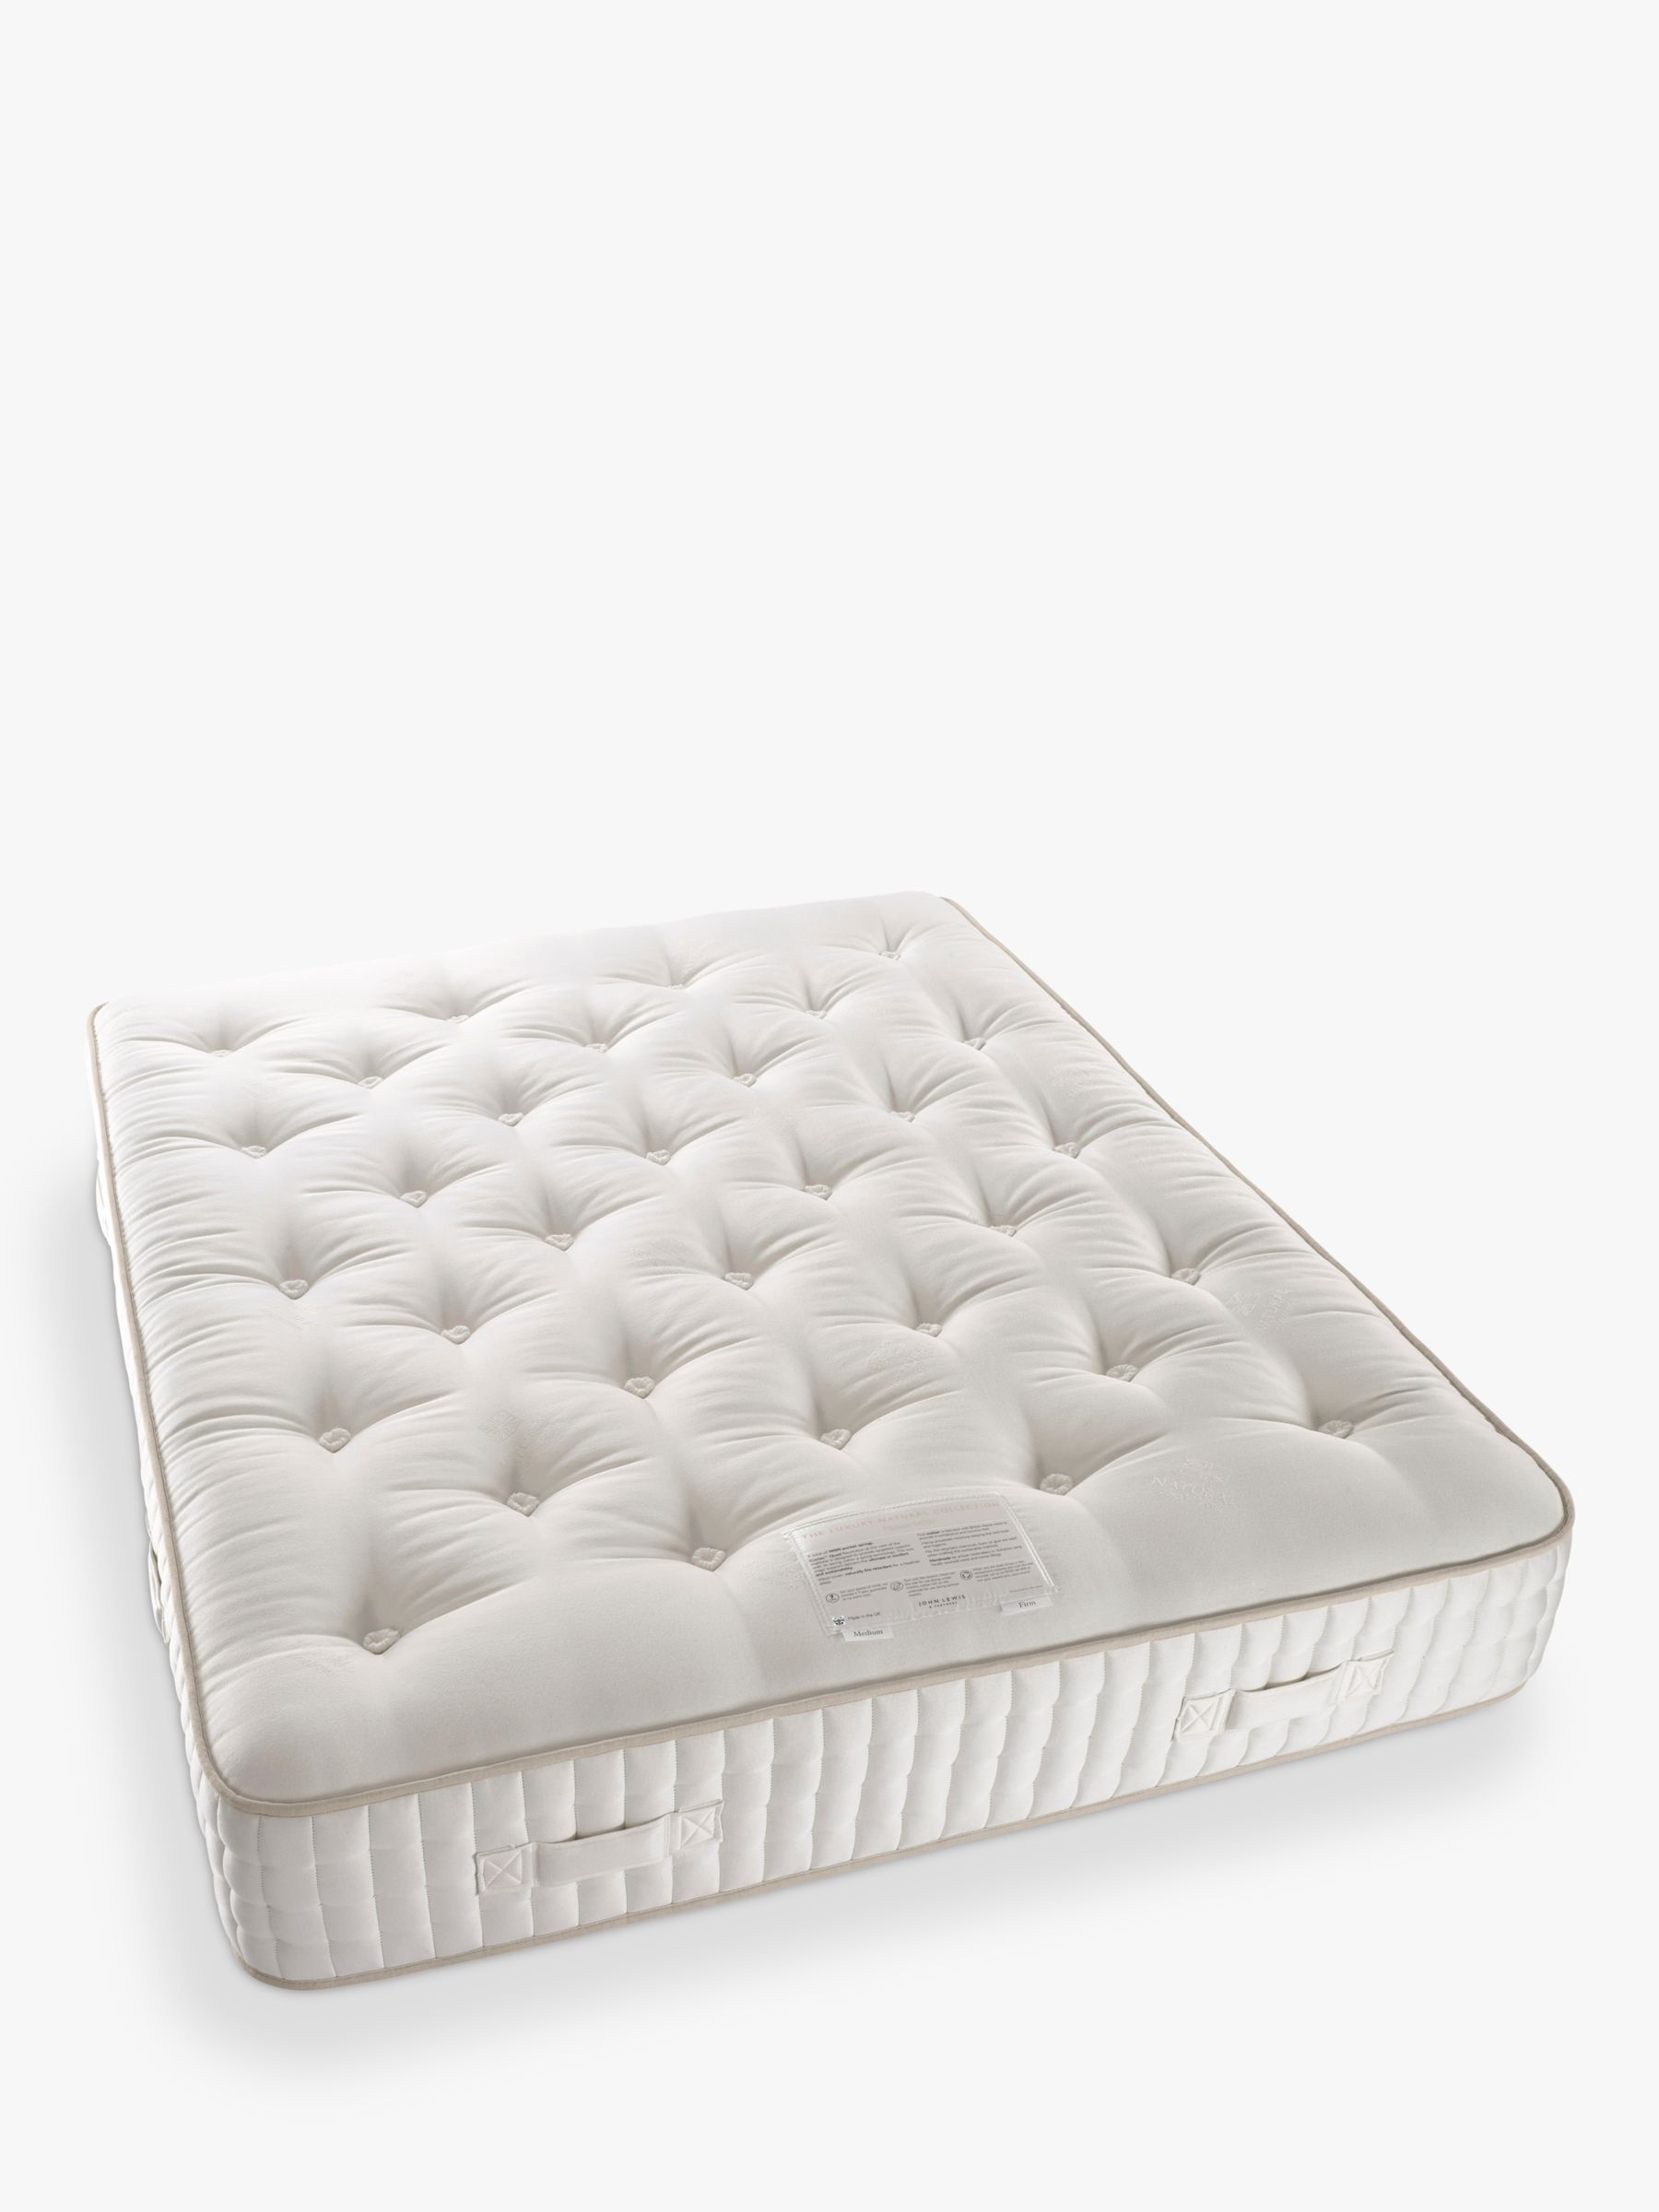 Photo of John lewis luxury natural collection mohair 14000 king size firmer tension pocket spring mattress